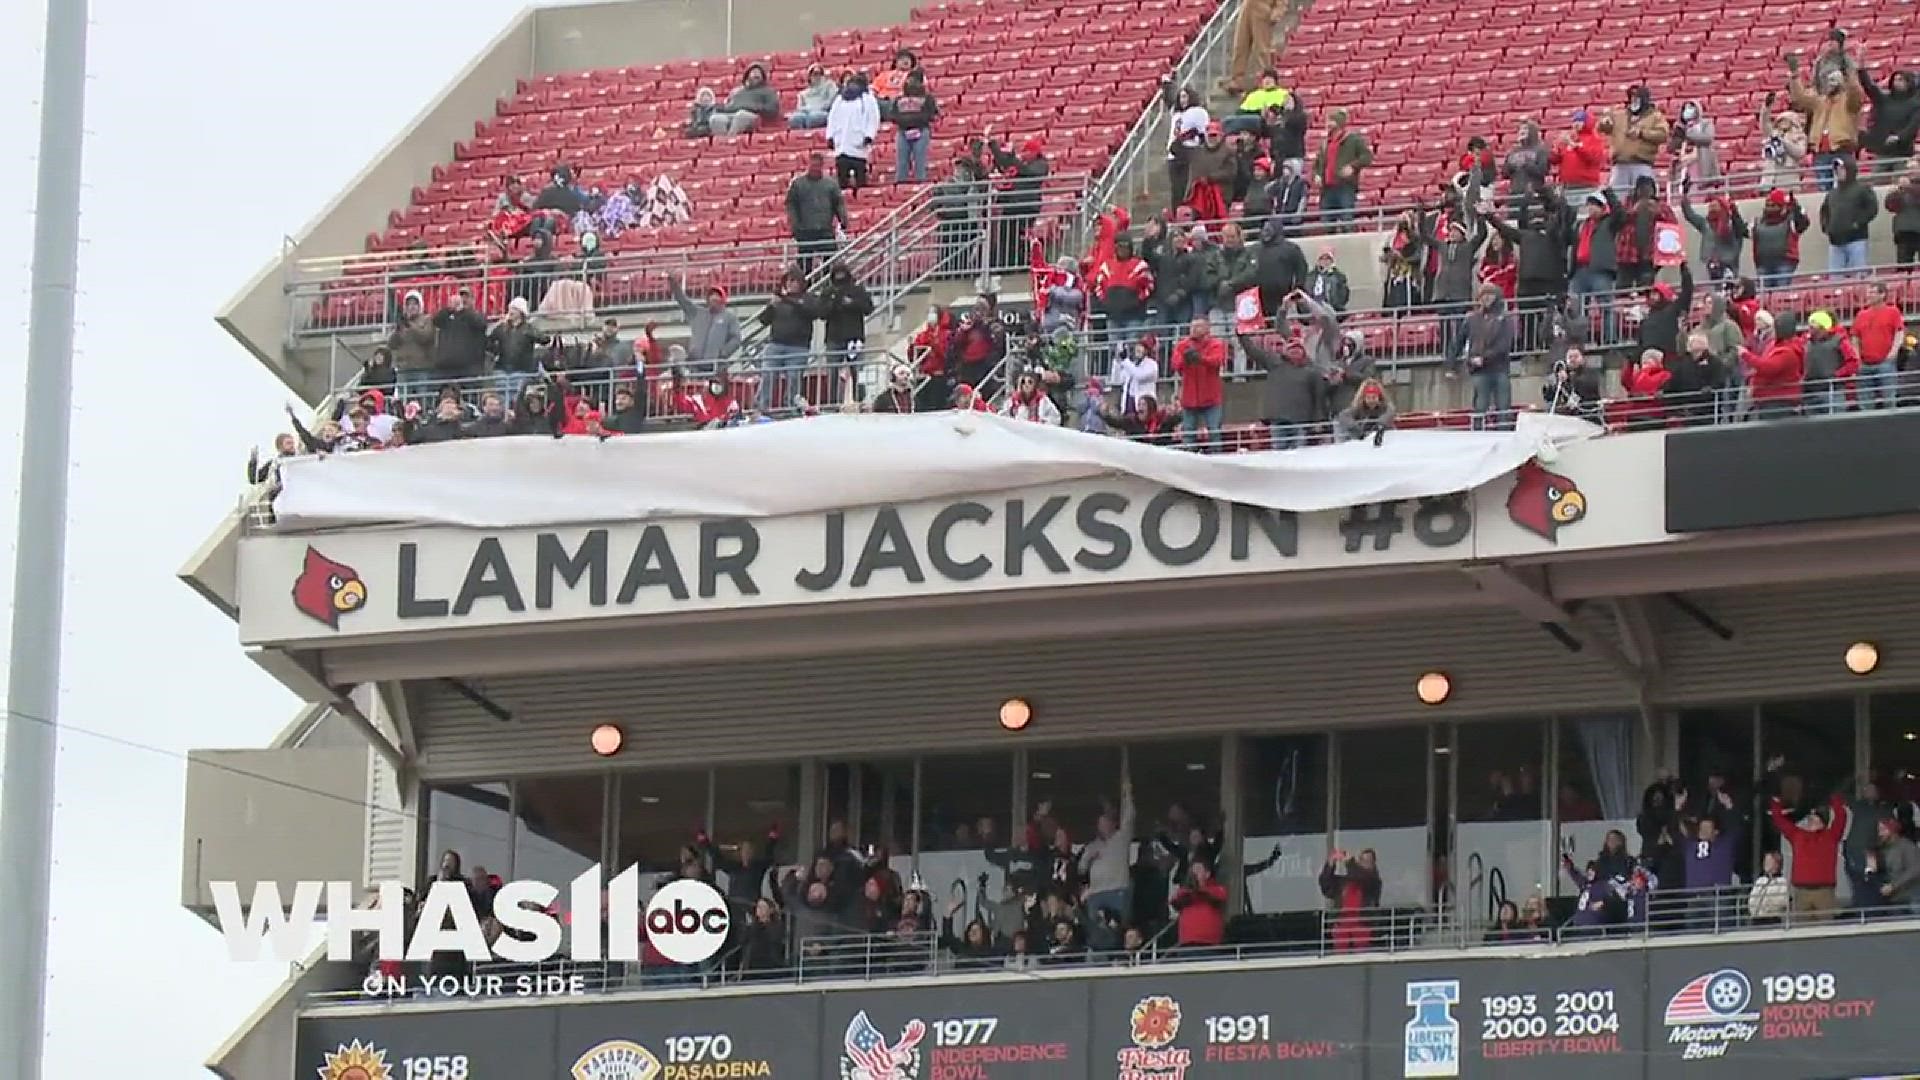 In front of thousands of fans, Lamar Jackson is in awe as he gives a speech celebrating his retirement of his jersey at Cardinal Stadium.